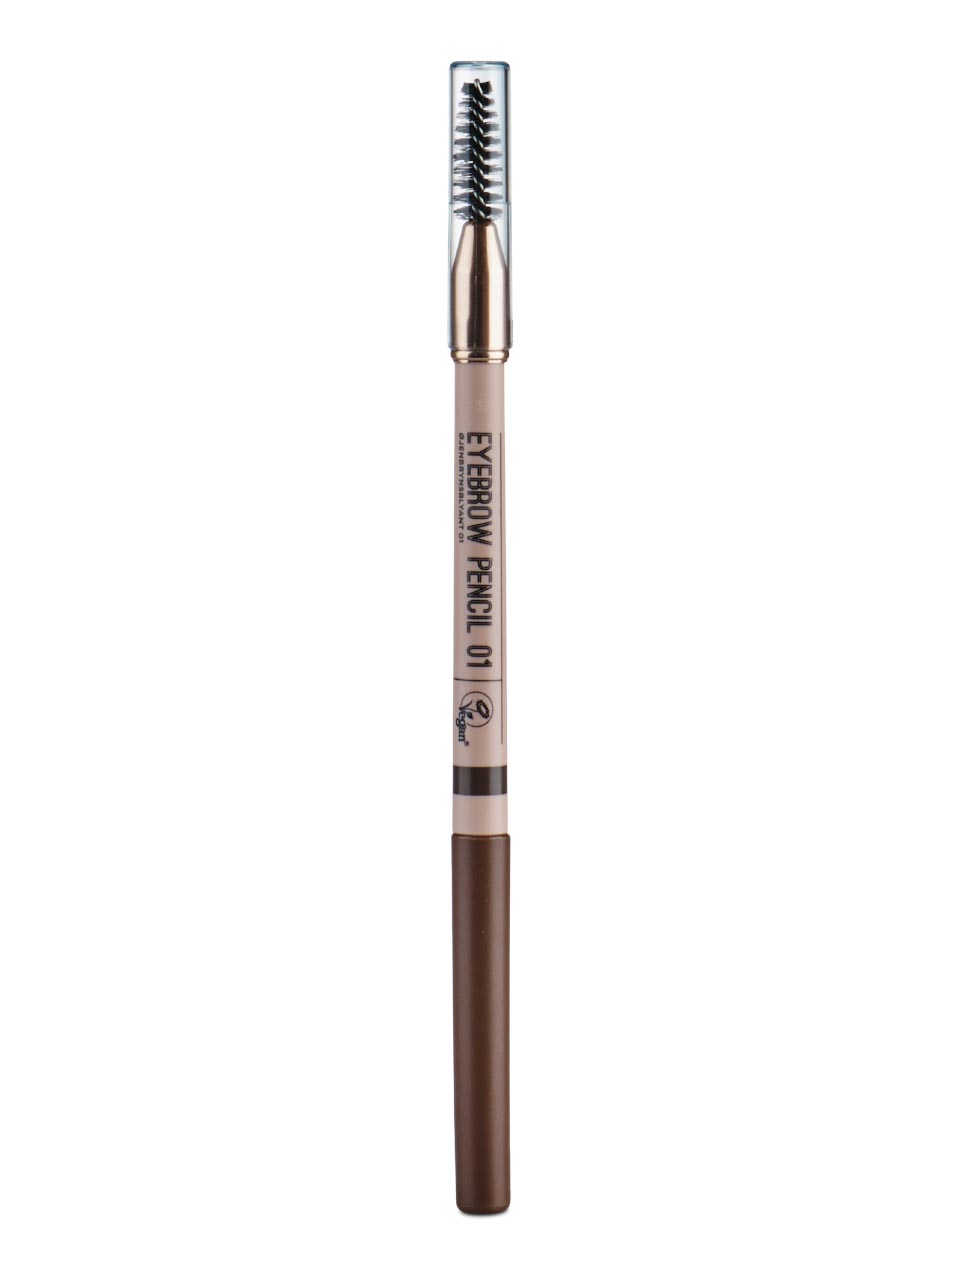 Ecooking Make-up Eyebrow pencil N° 01 Taupe null - onesize - 1